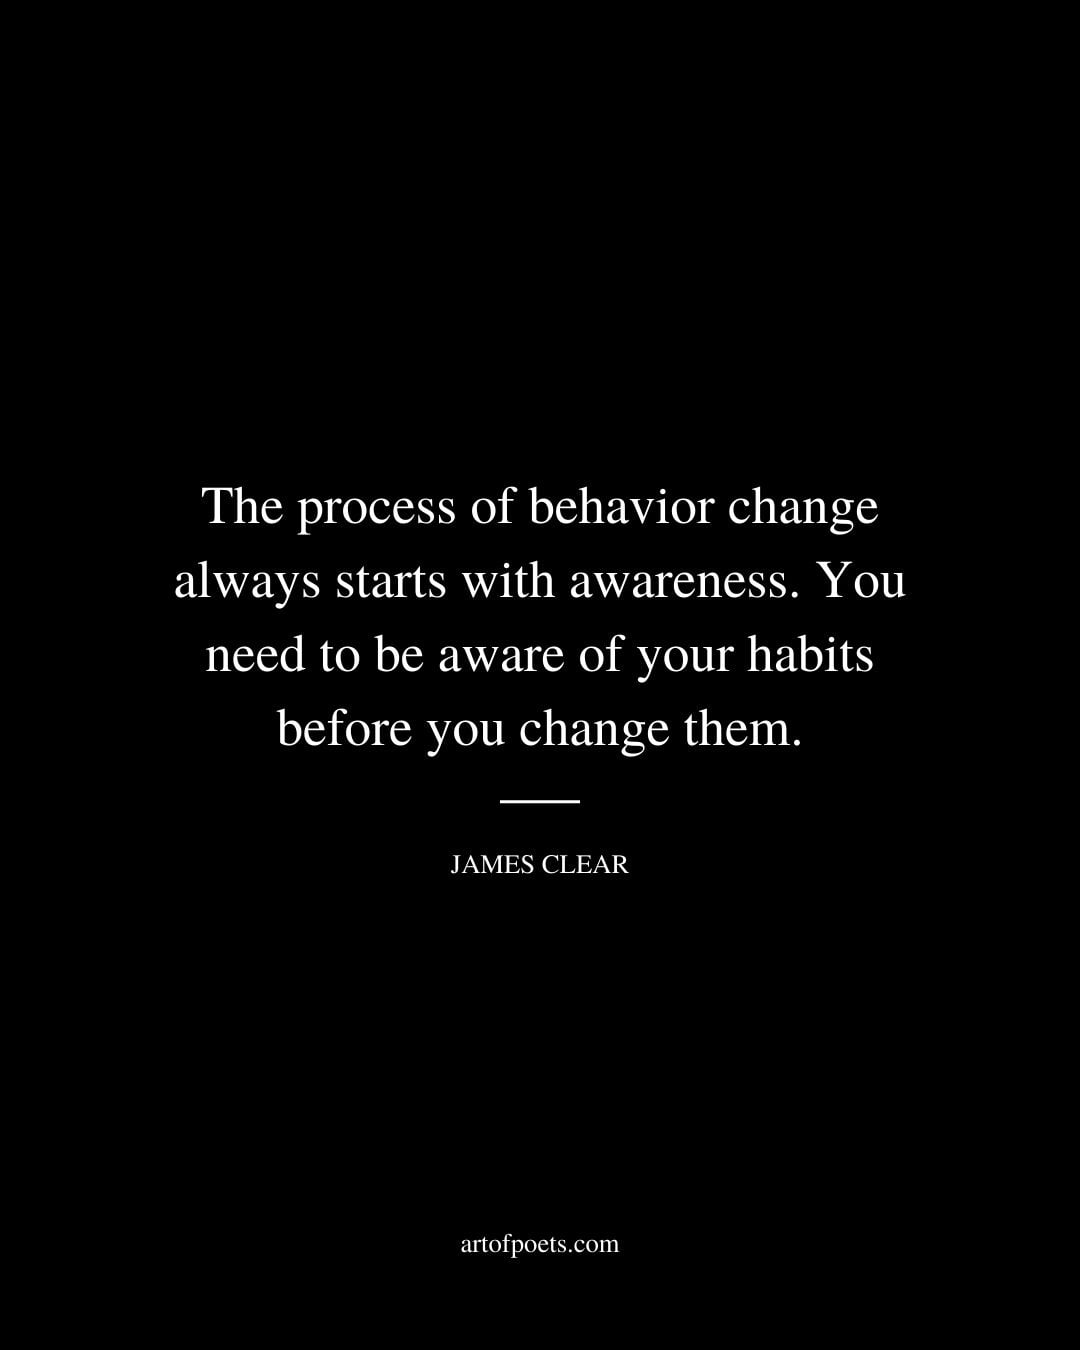 The process of behavior change always starts with awareness. You need to be aware of your habits before you change them